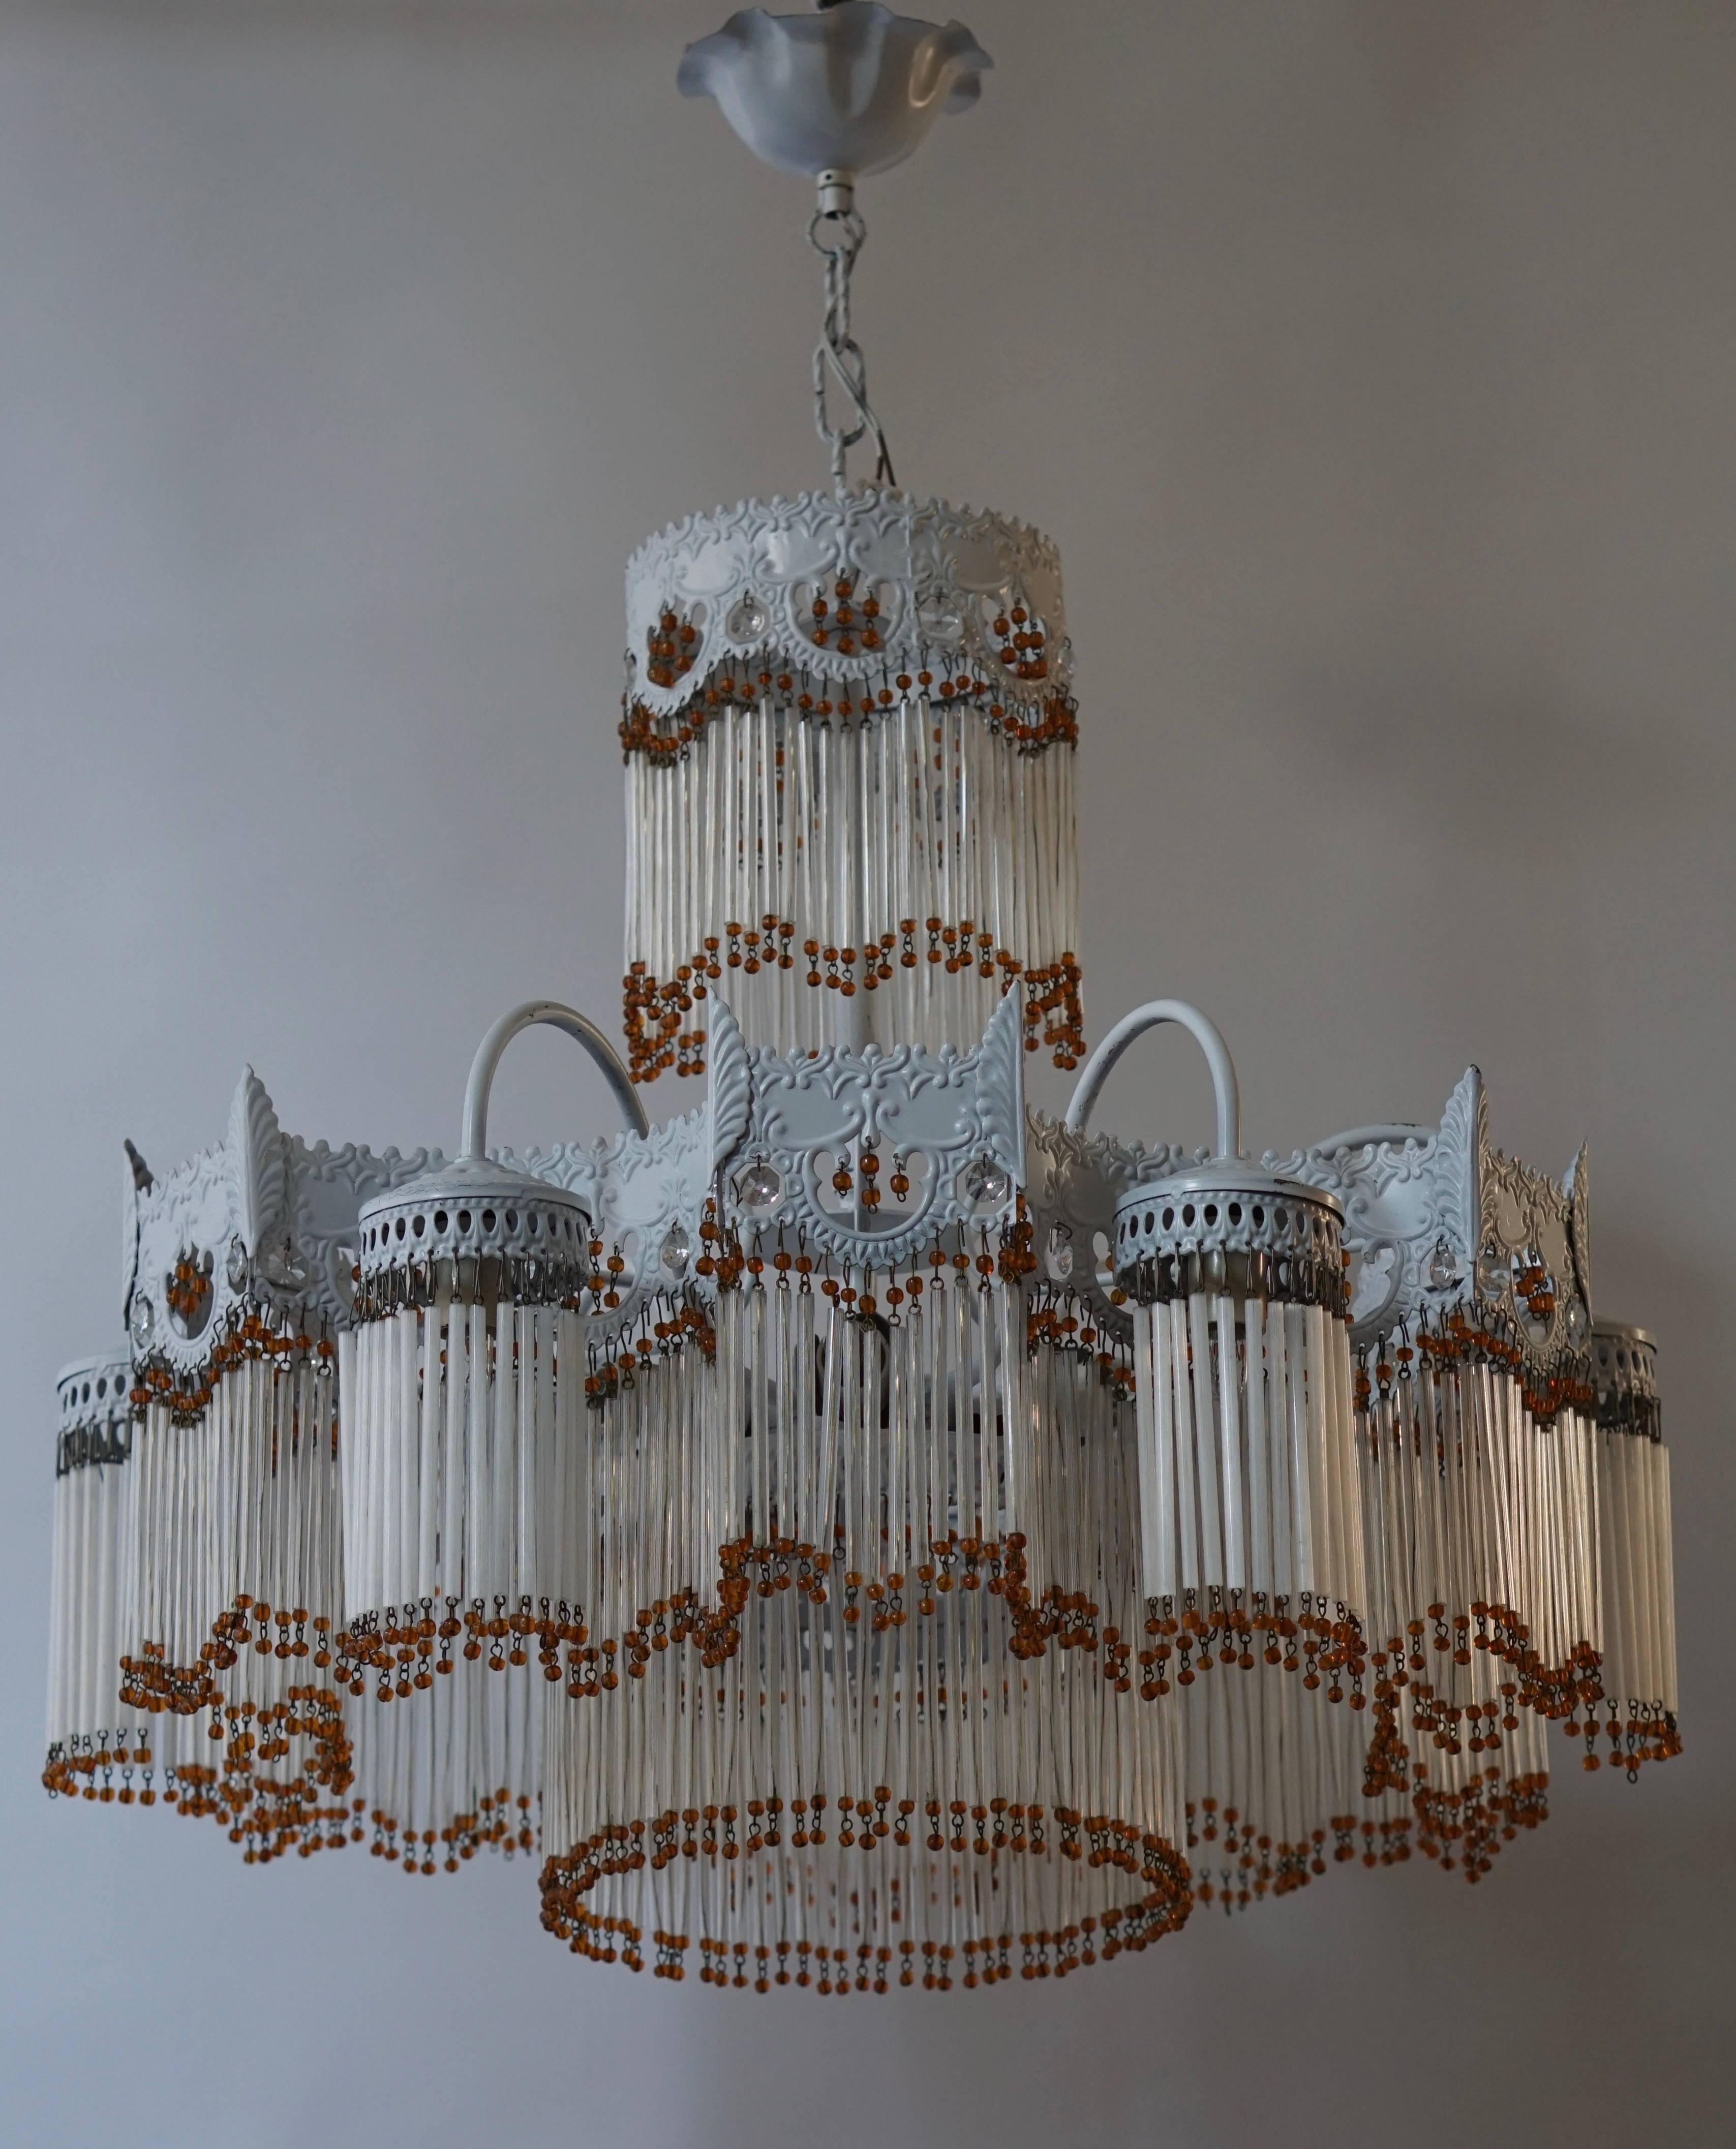 Italian Murano glass chandelier.
The frame was originally black but was later painted in white.
Diameter: 60 cm.
Total height with the chain is 80 cm.
Height without chain is 55 cm.
Six E14 bulbs.